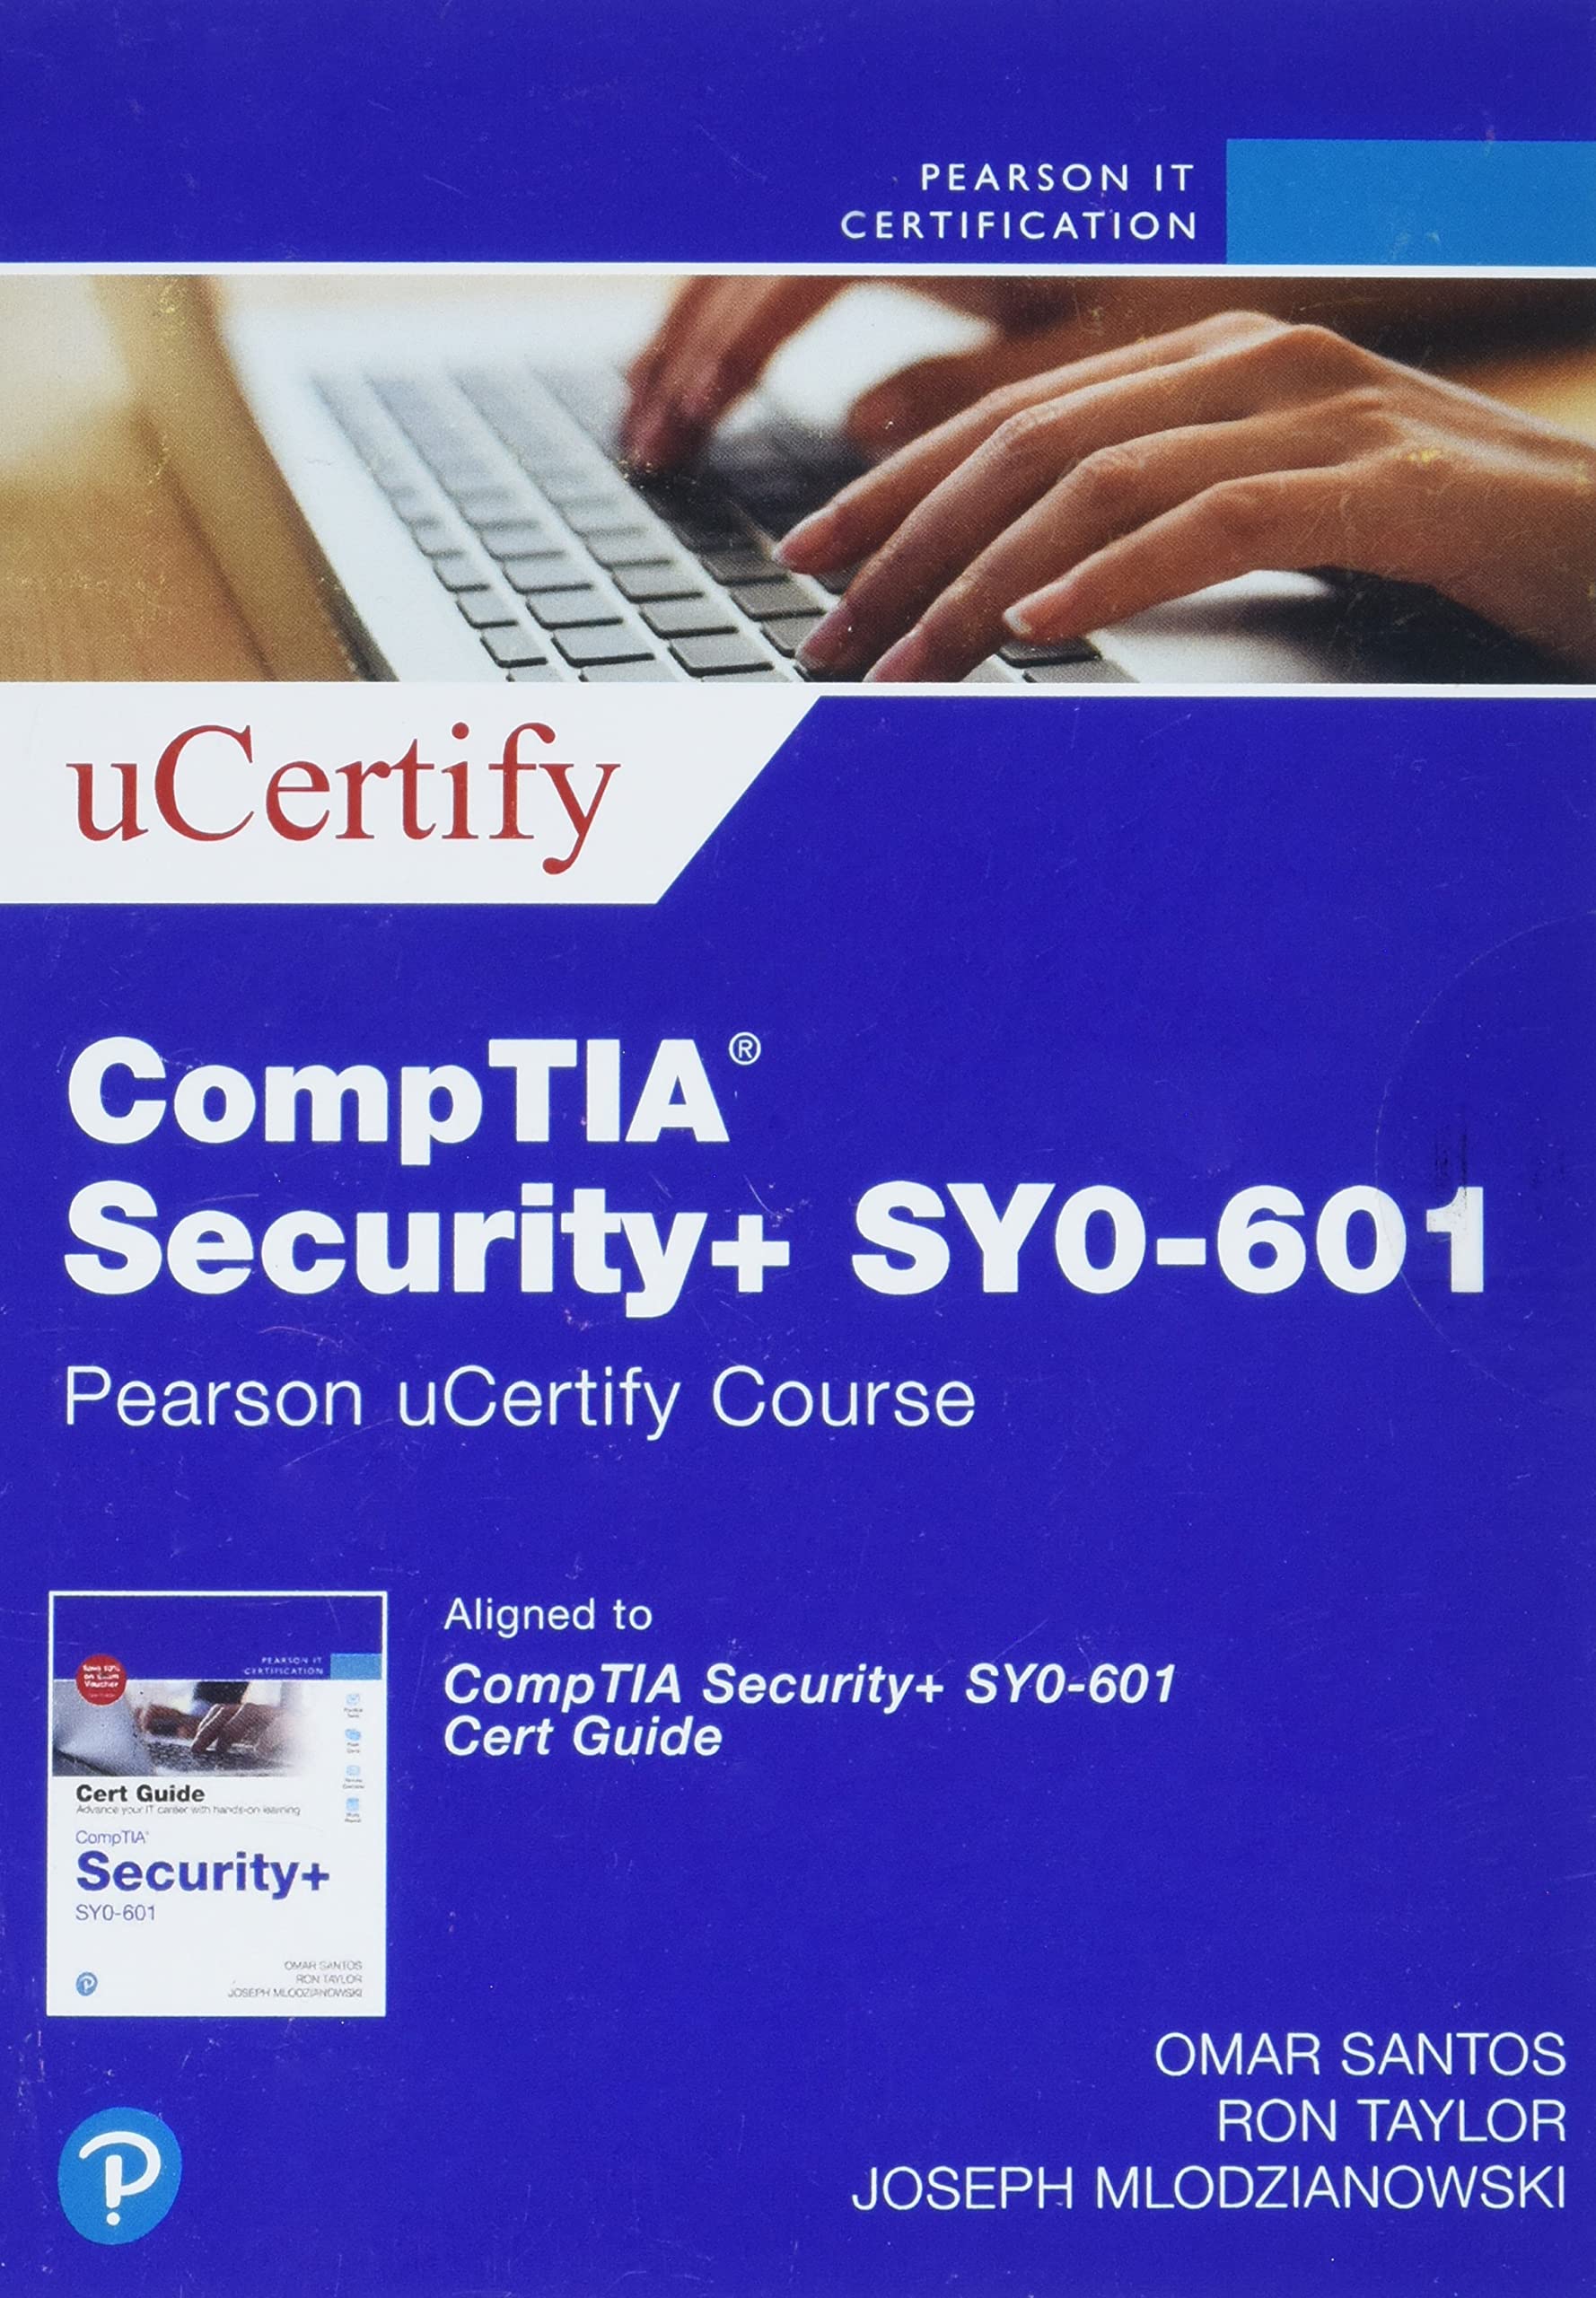 CompTIA Security+ SY0-601 Cert Guide Pearson uCertify Course Access Code Card